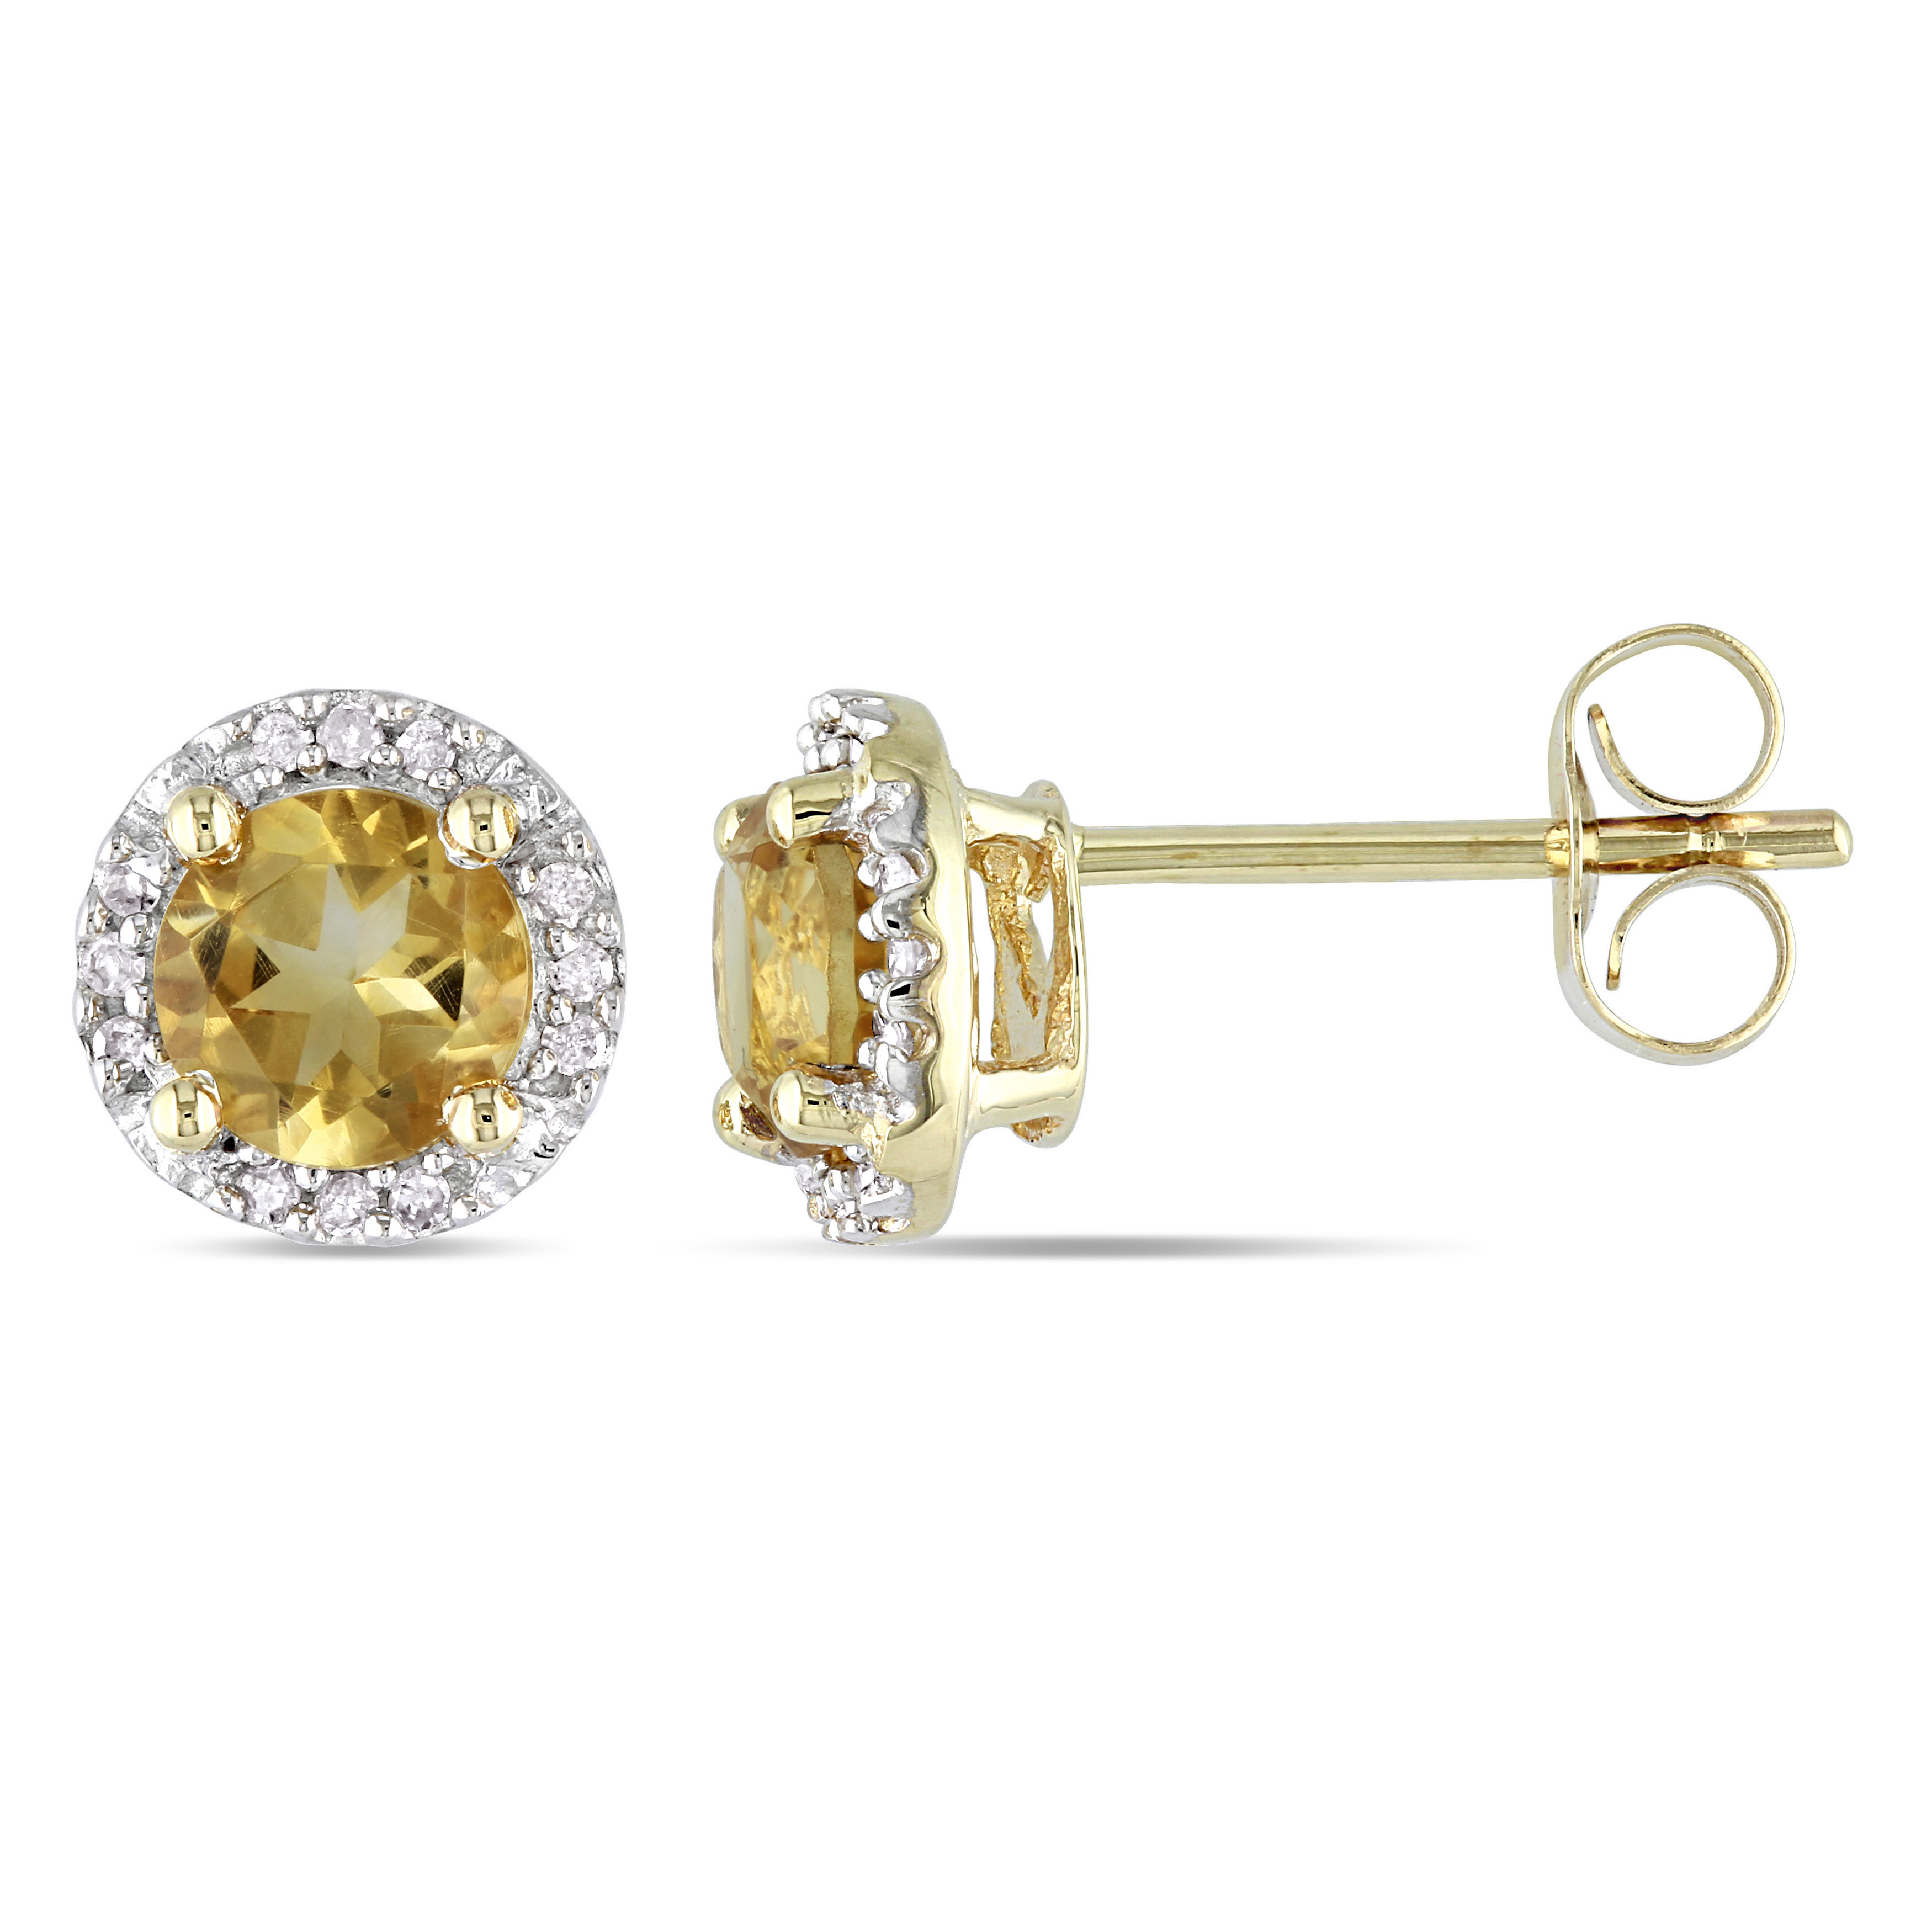 Citrine Halo Earrings with Diamonds in 10k Yellow Gold